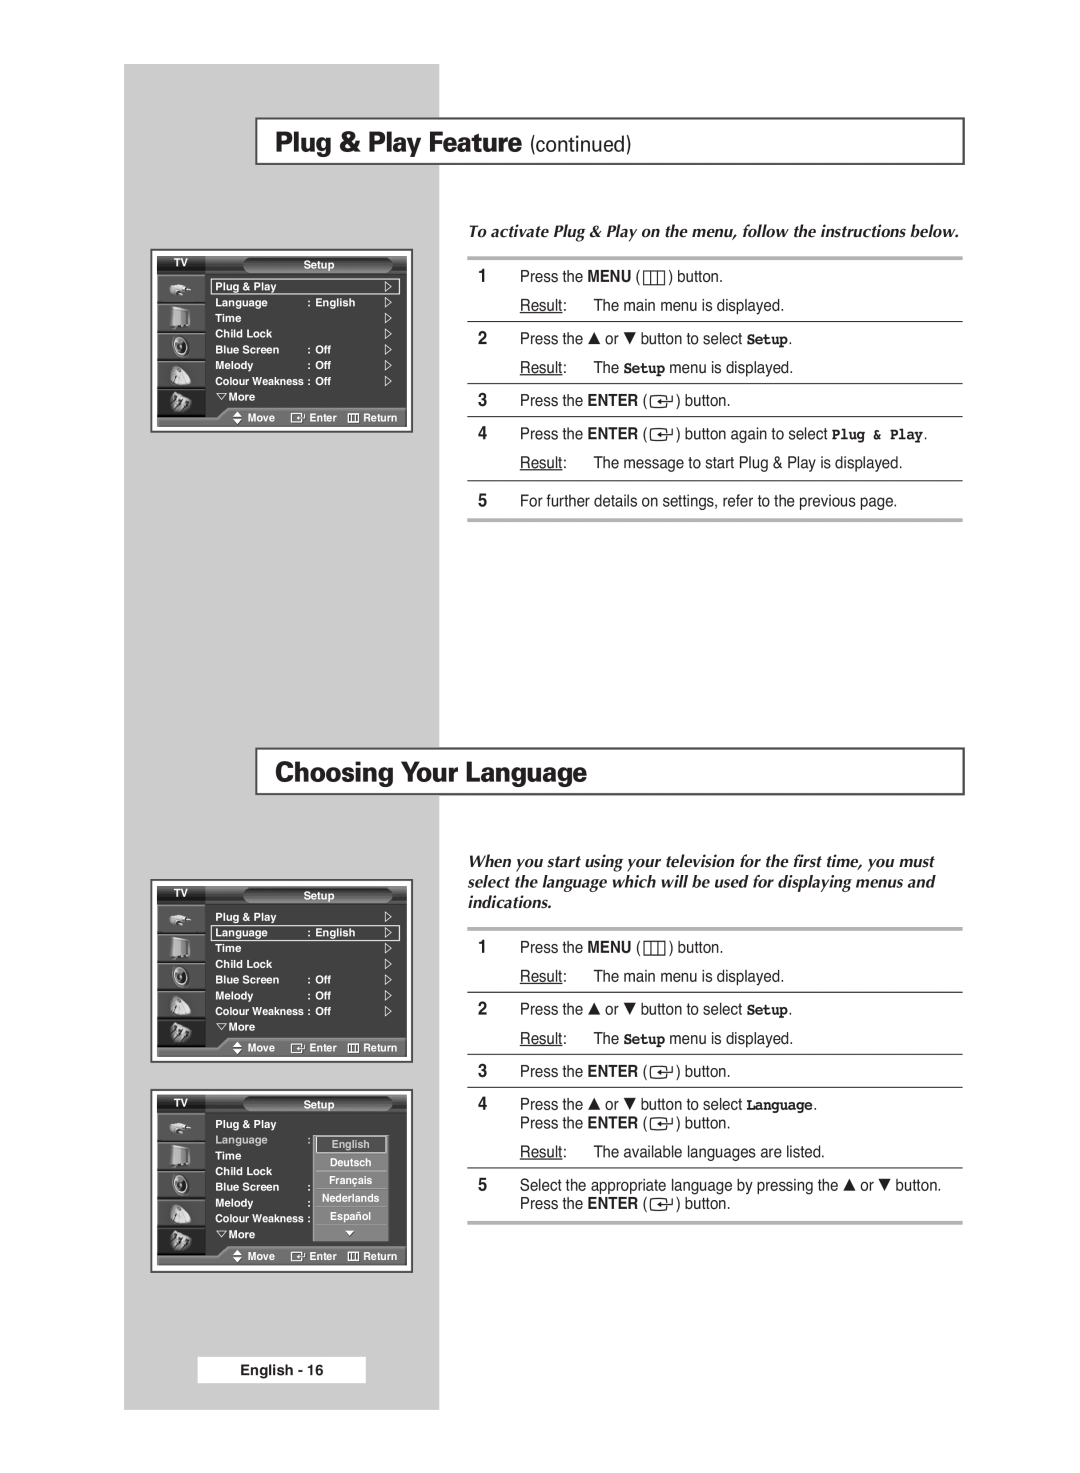 Samsung PS-42S5S manual Plug & Play Feature continued, Choosing Your Language 